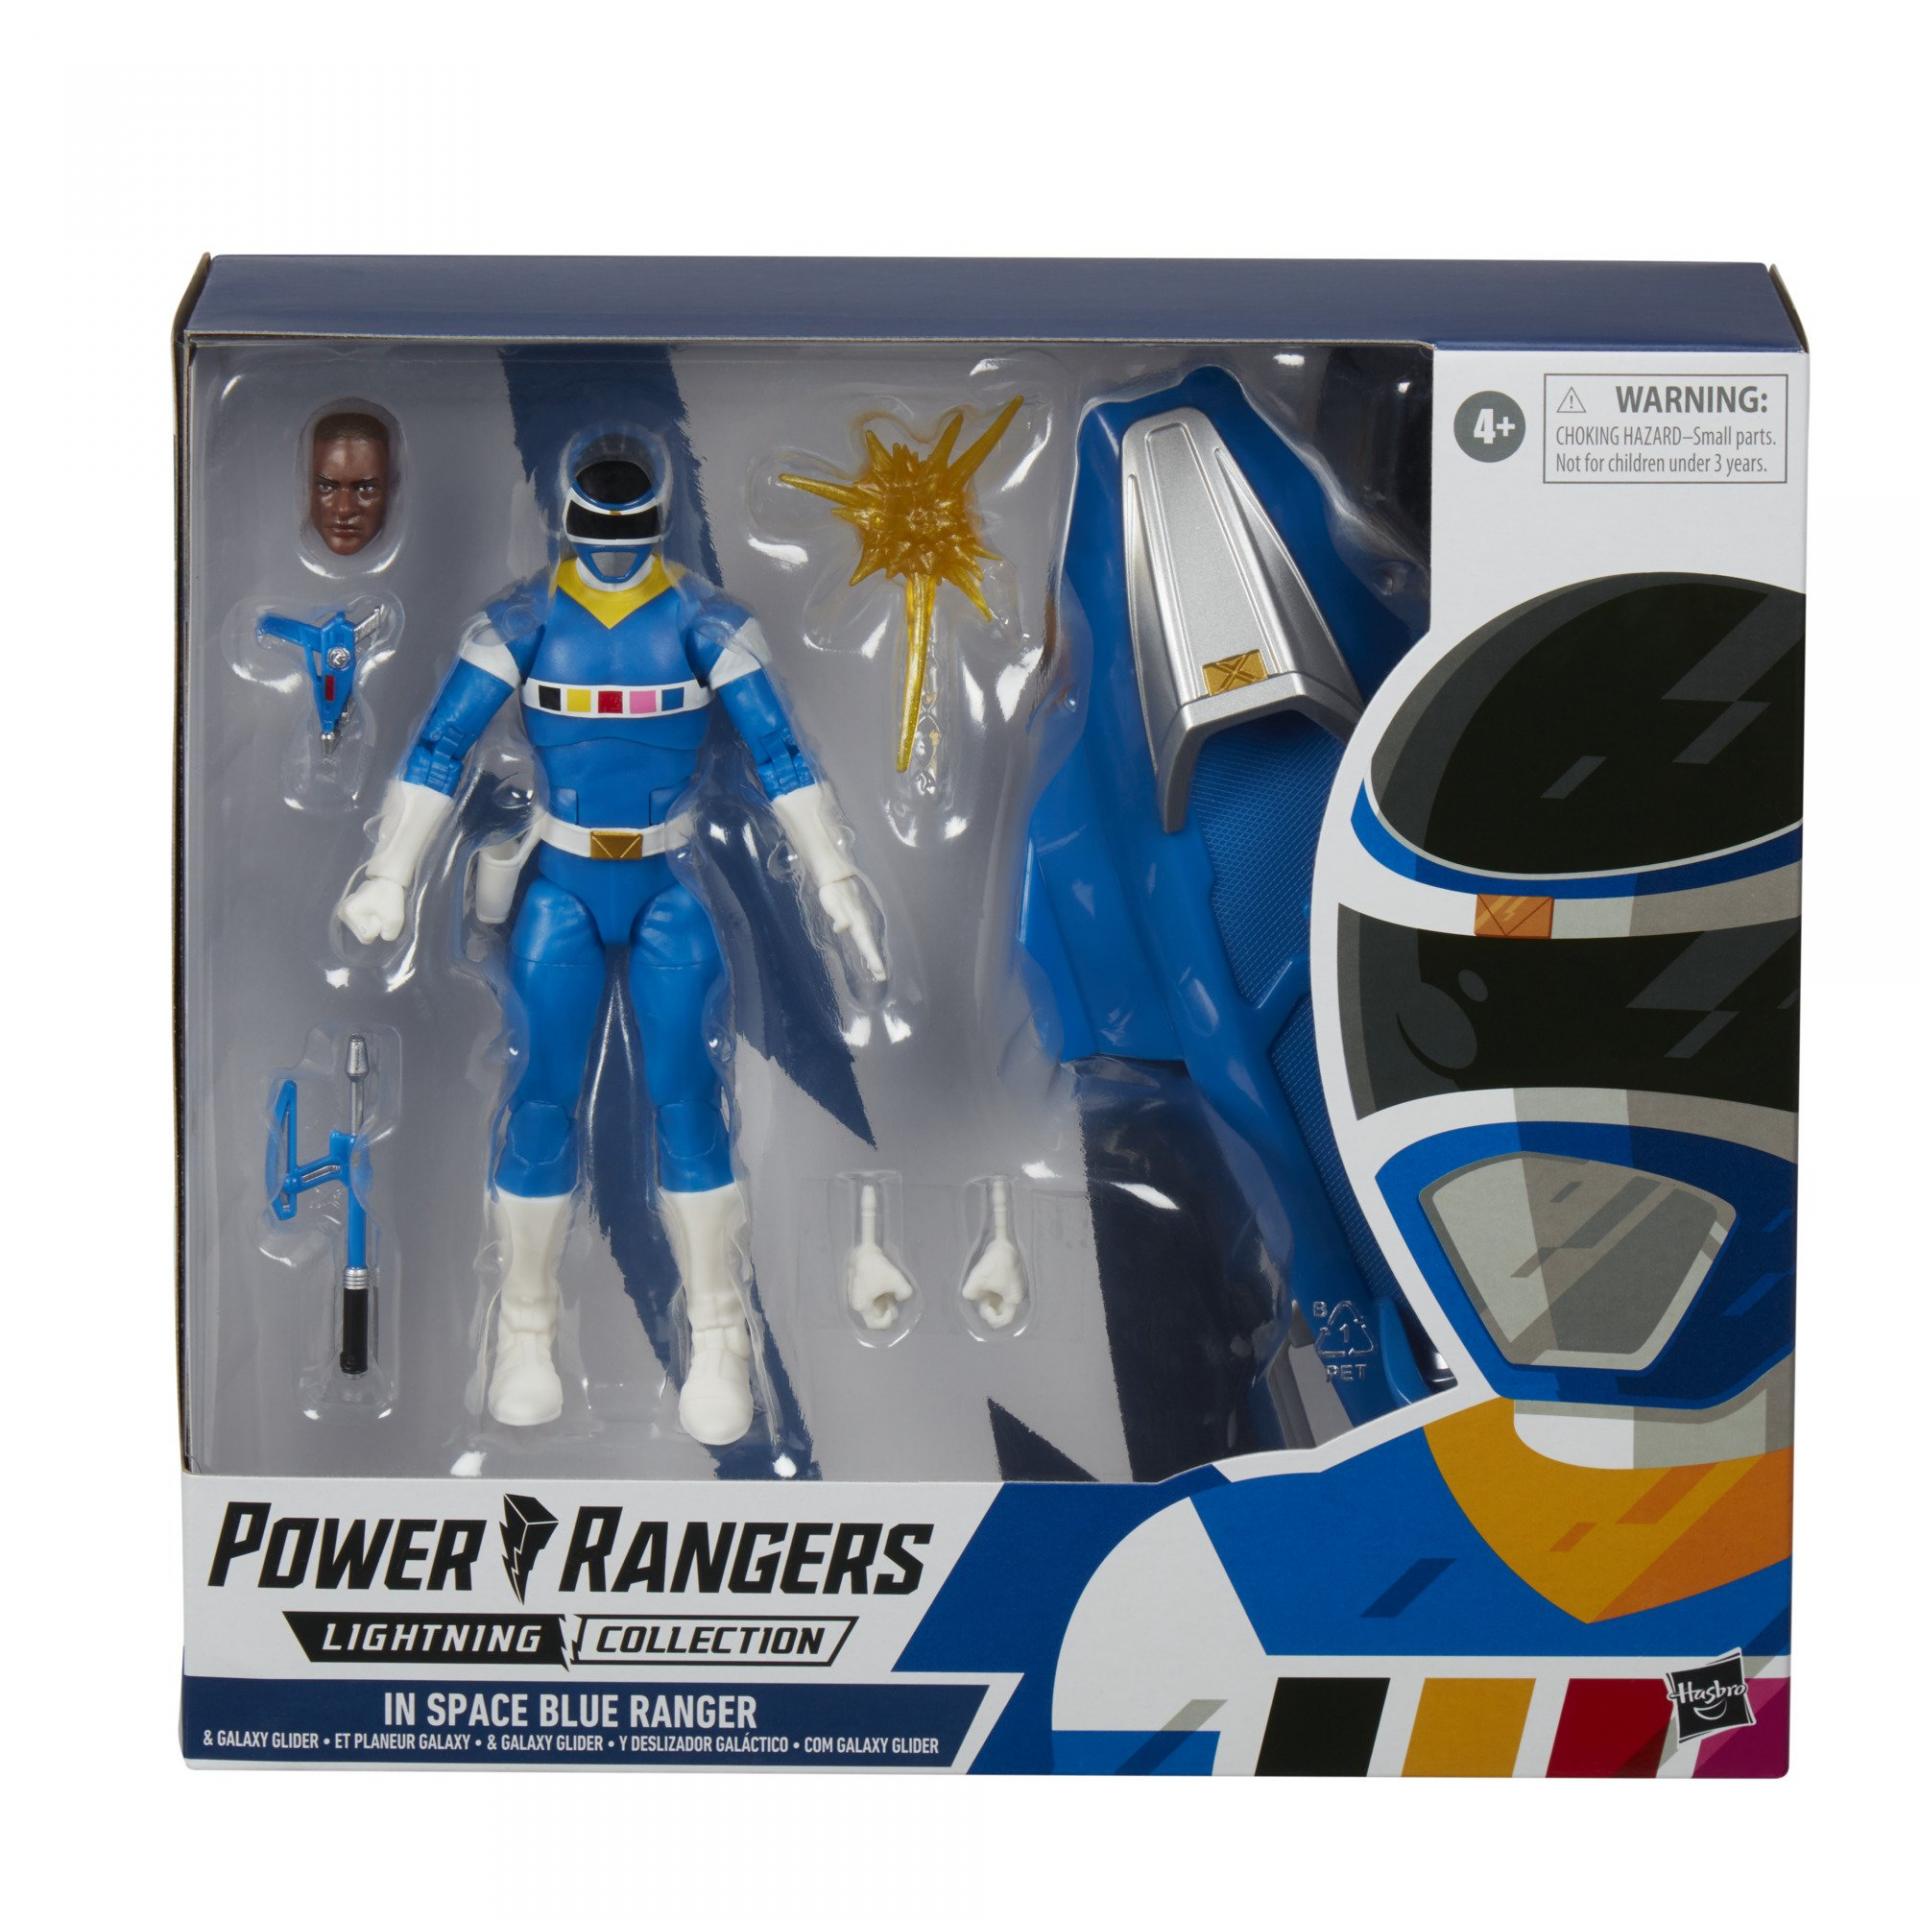 Power rangers lightning collection in space blue ranger galaxy glider8